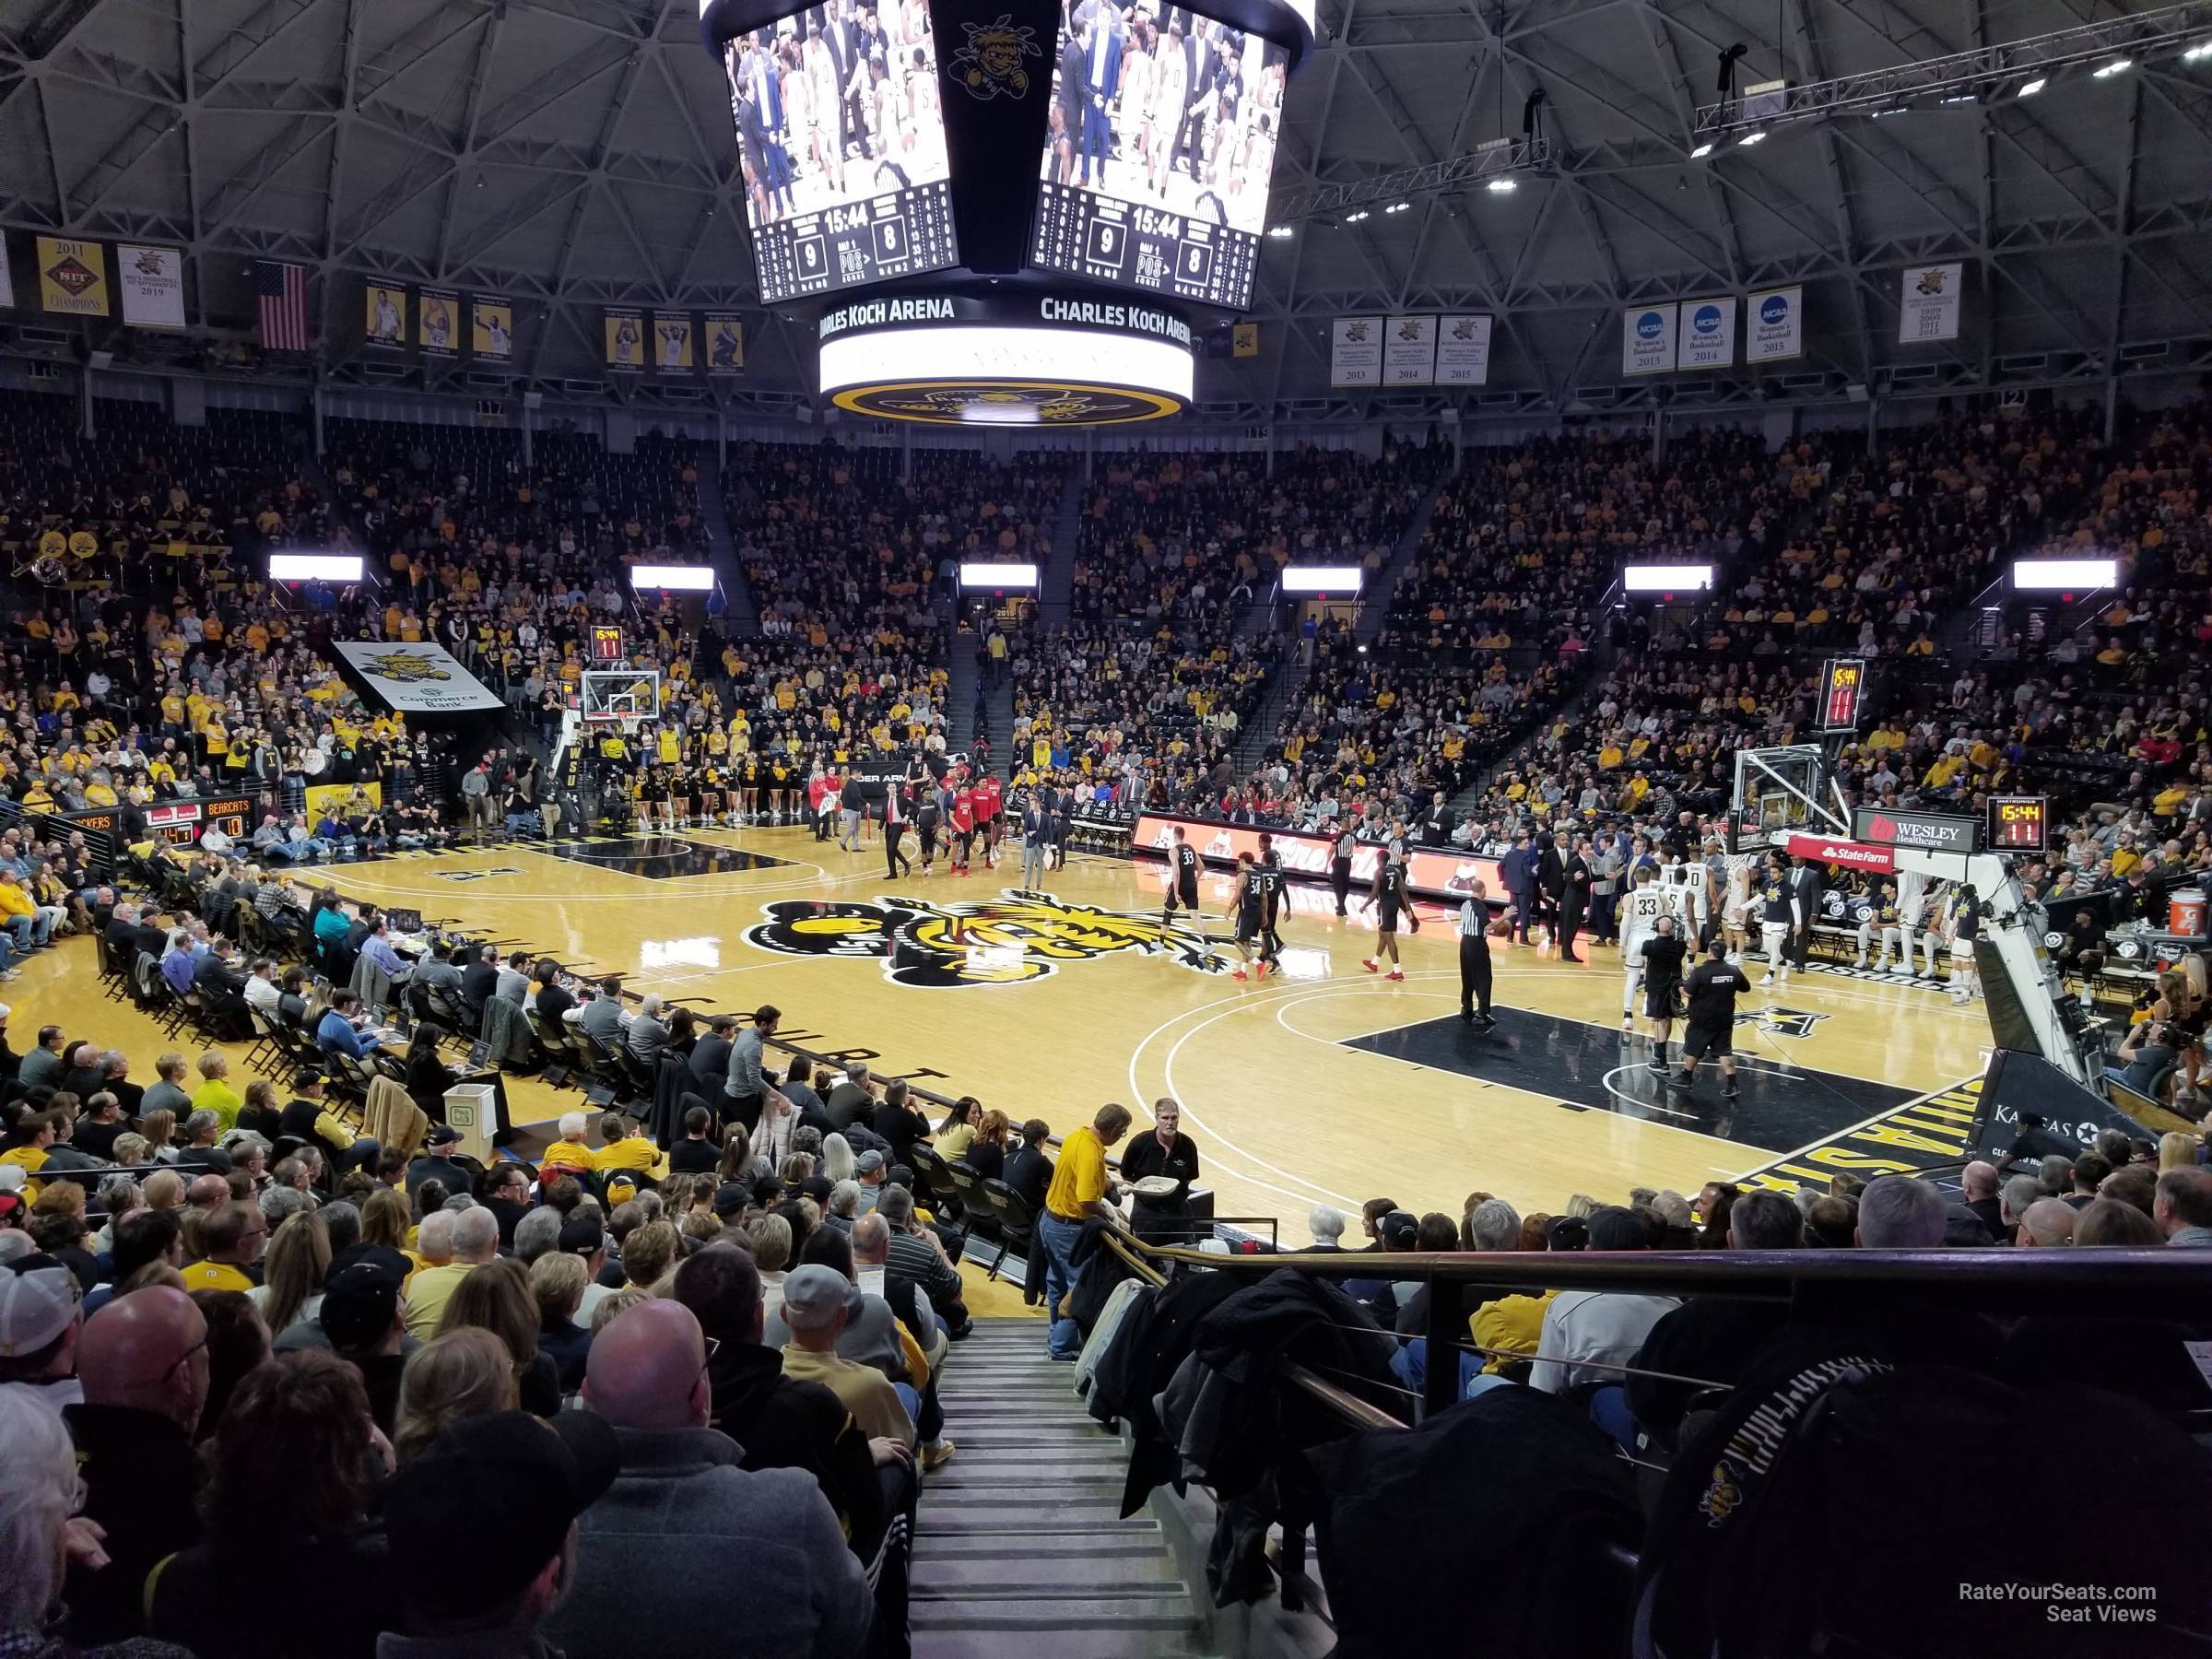 section 102, row 16 seat view  - charles koch arena